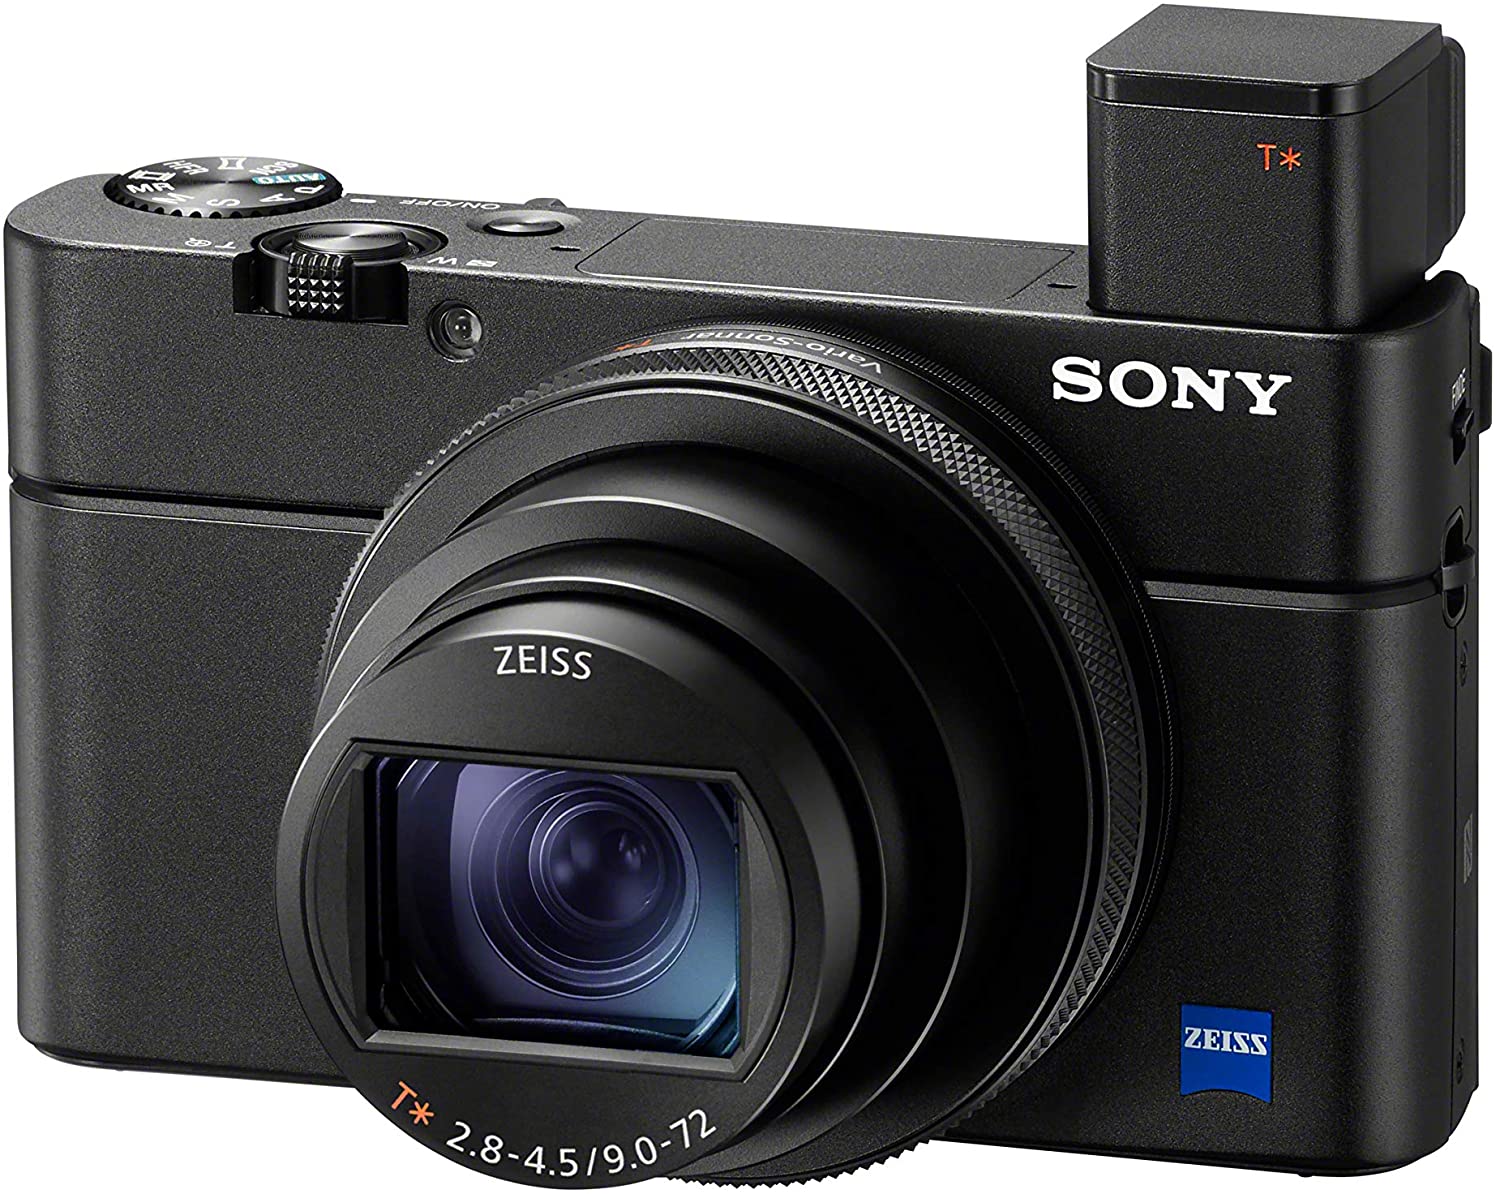 Best Compact Camera for Travel